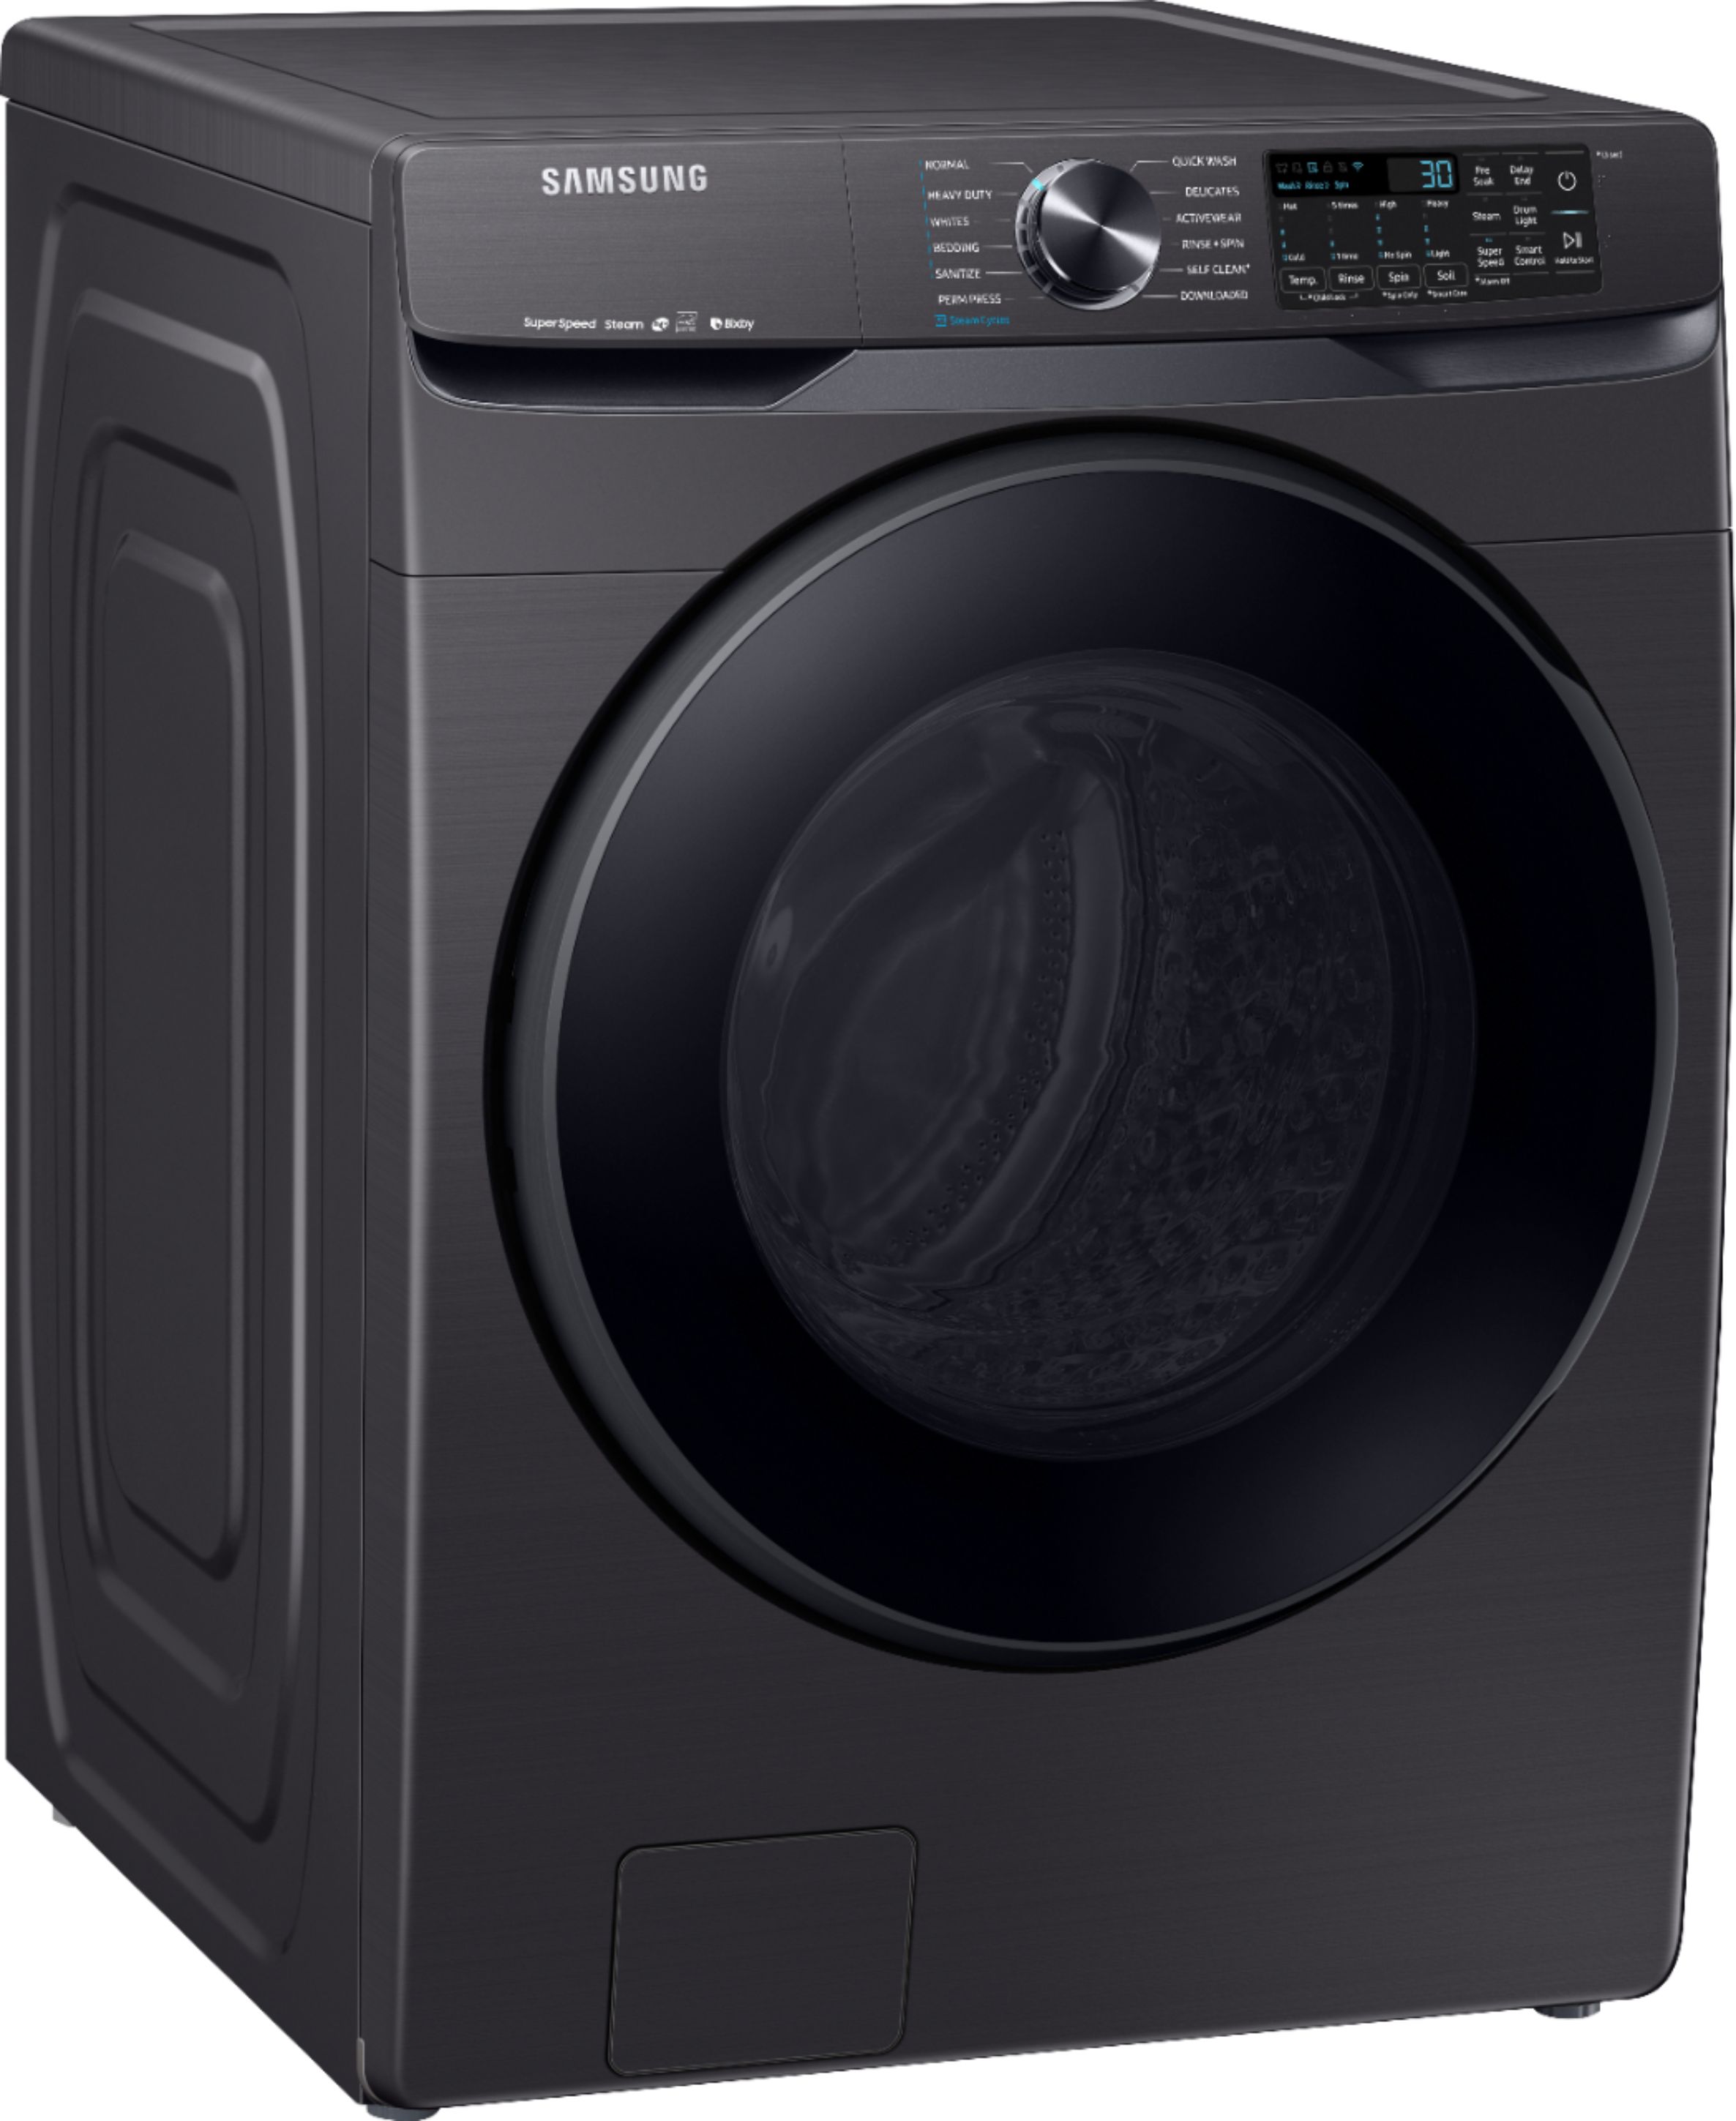 Angle View: Whirlpool - 5.0 Cu. Ft. High Efficiency Stackable Front Load Washer with Steam and Load & Go XL Dispenser - Chrome shadow